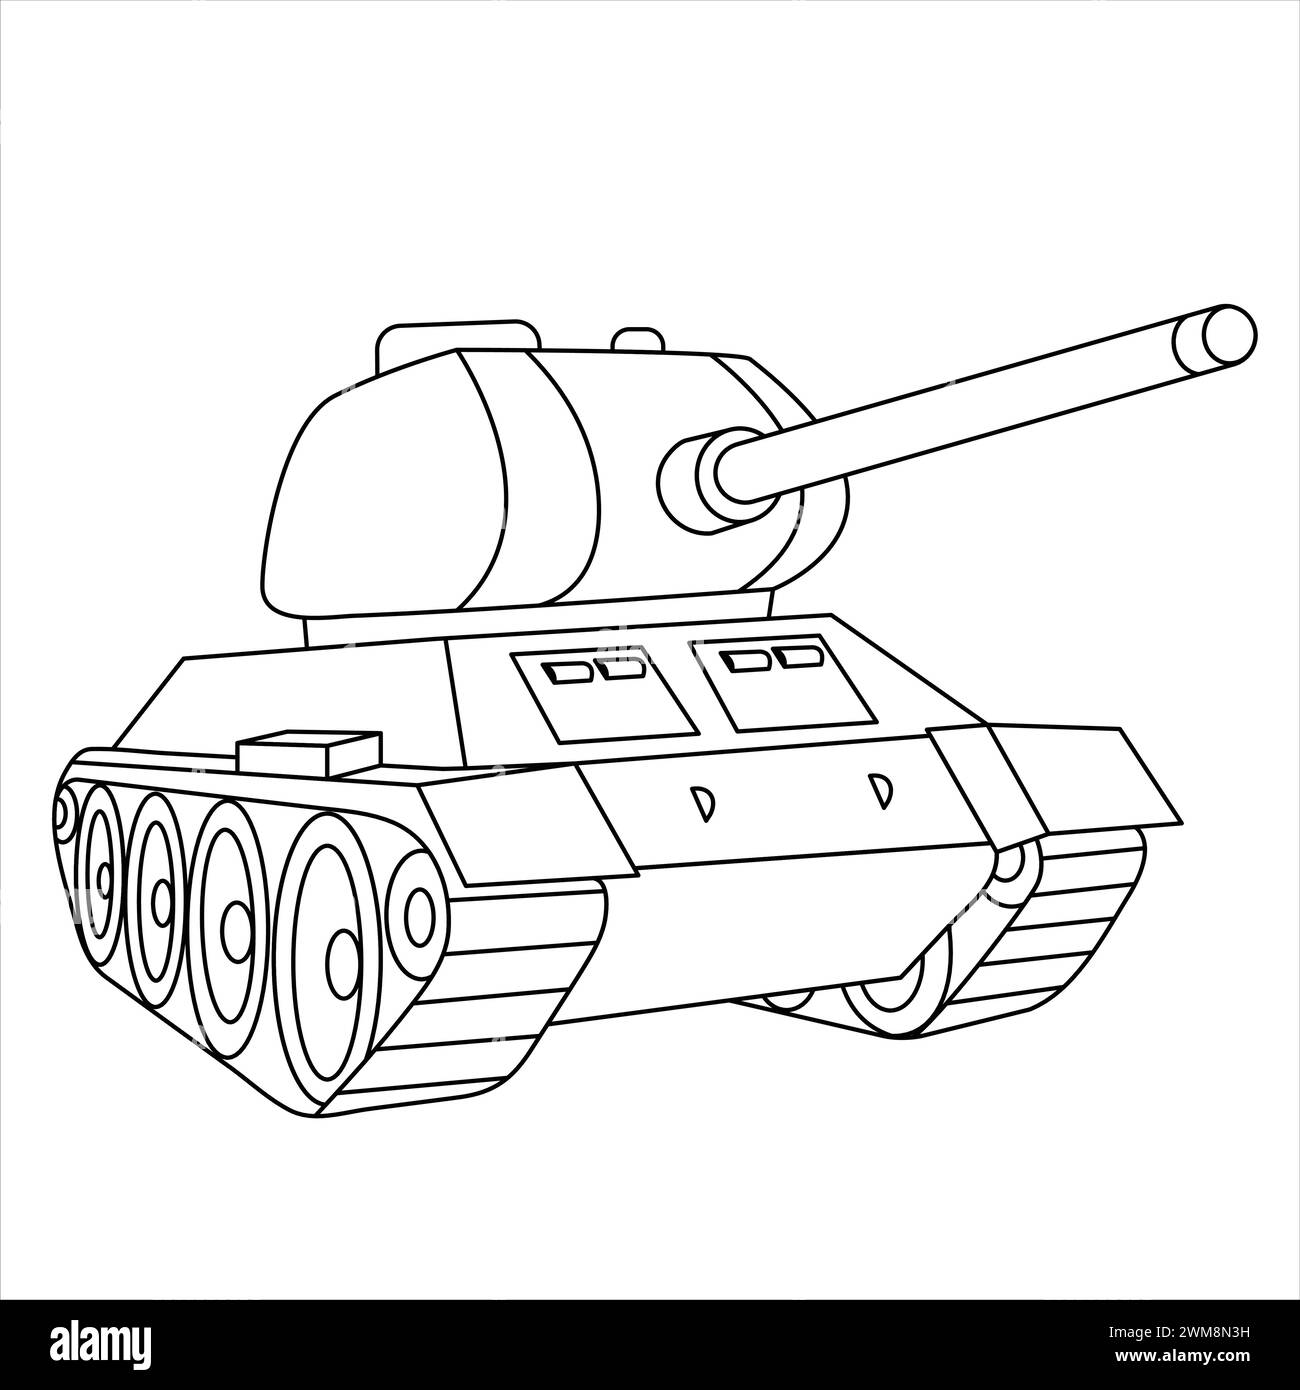 Tank Coloring Page. Military Vehicle Cartoon Illustration. Line Art Drawing For Kids And Adults Stock Vector